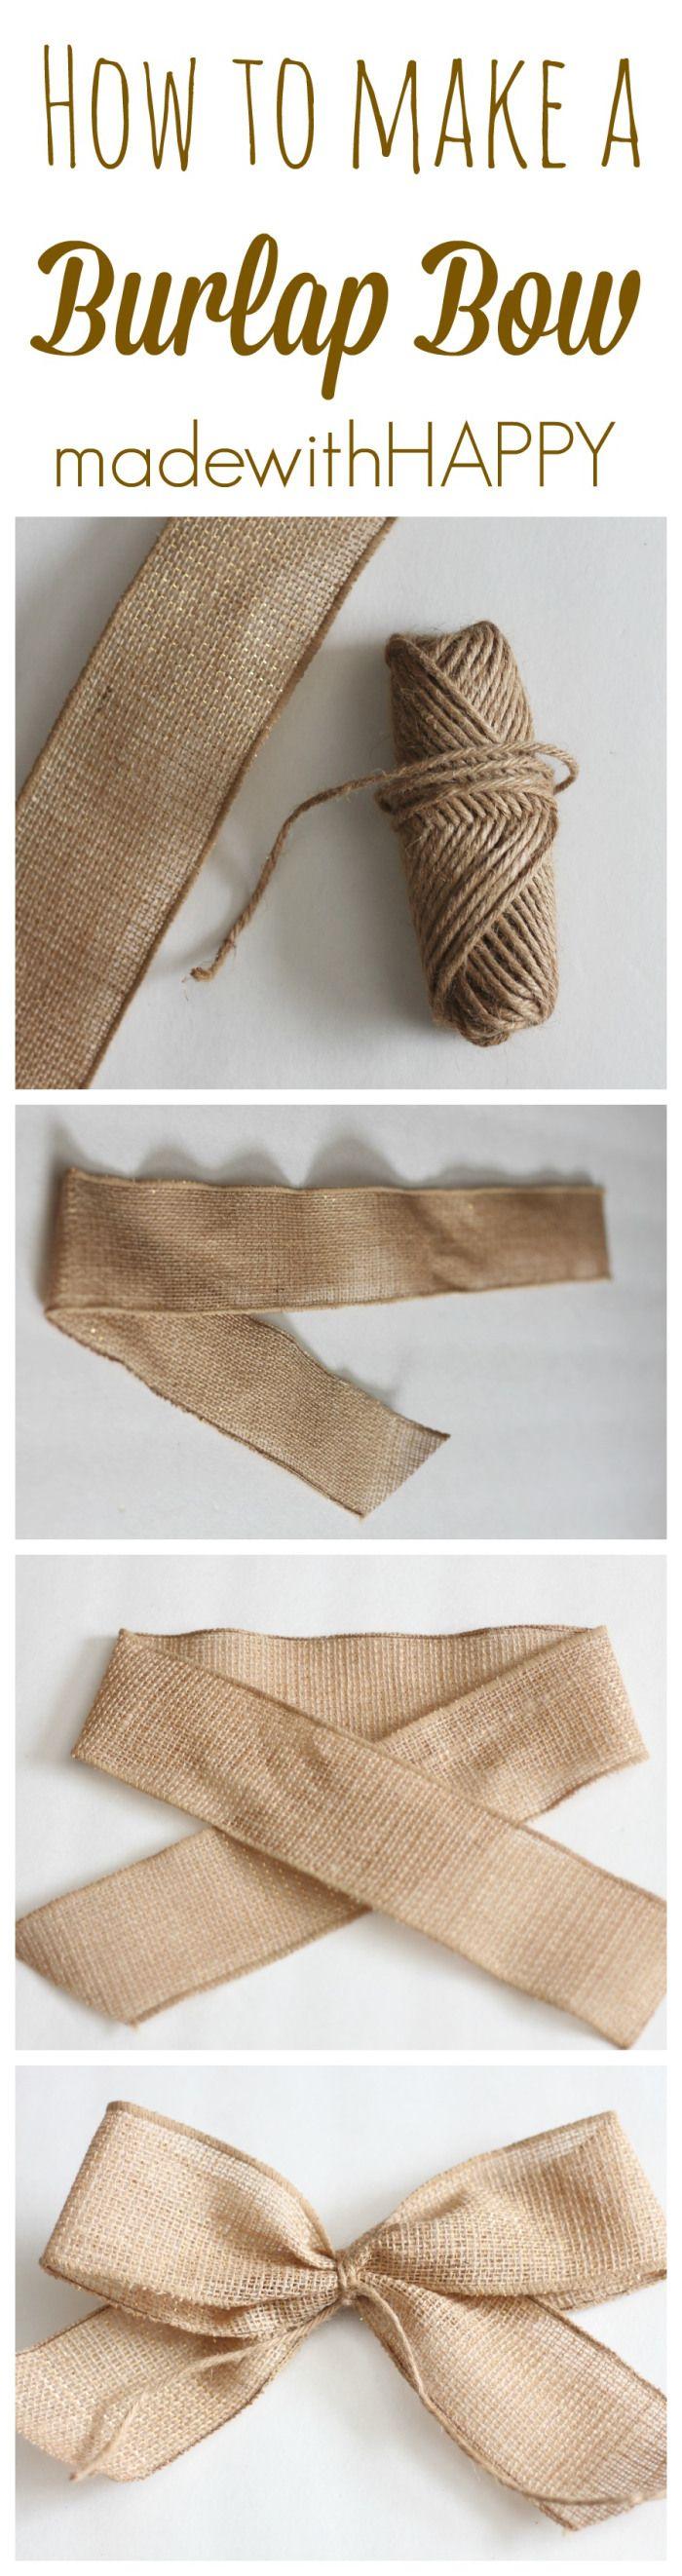 Hochzeit - How To Make A Burlap Bow